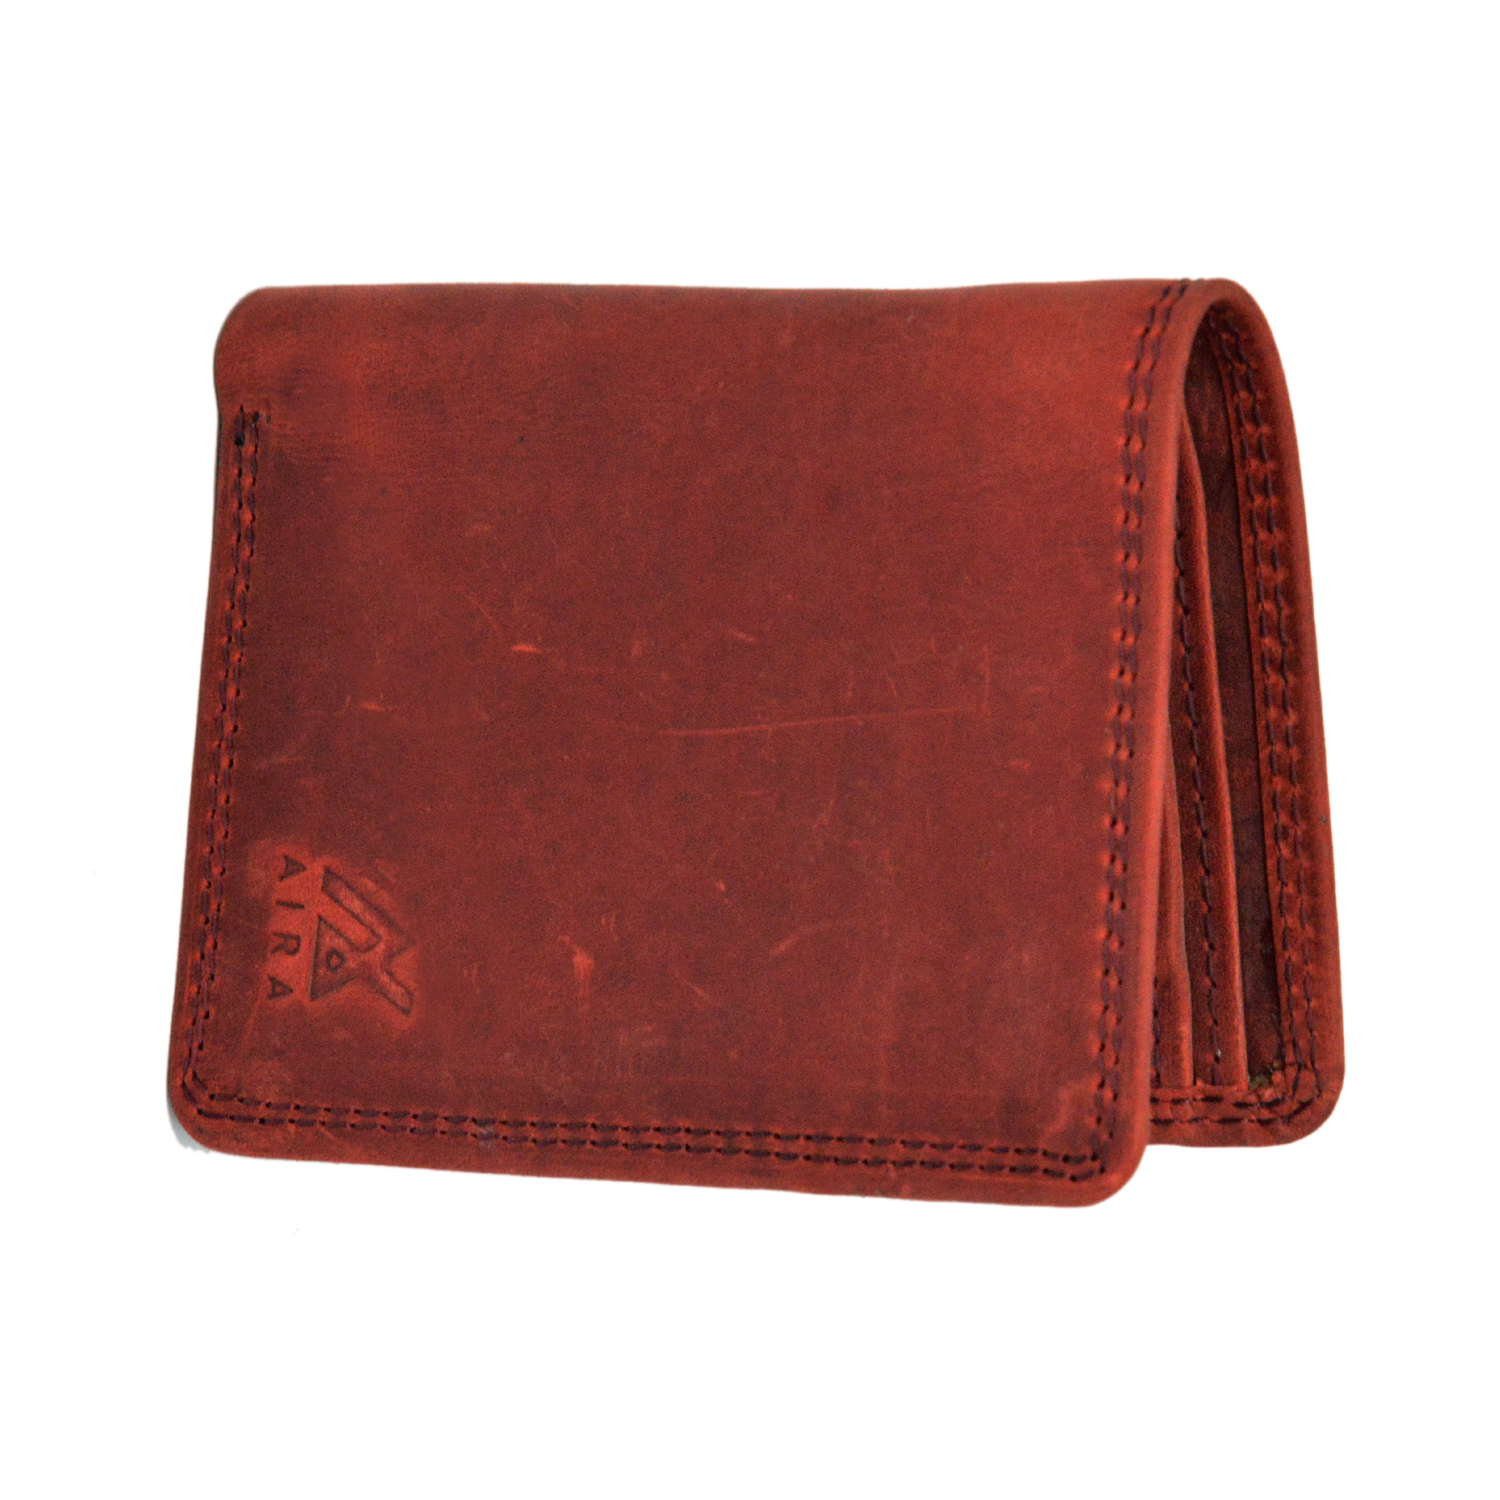 Crazy Horse Real Leather Wallet Bordo Color